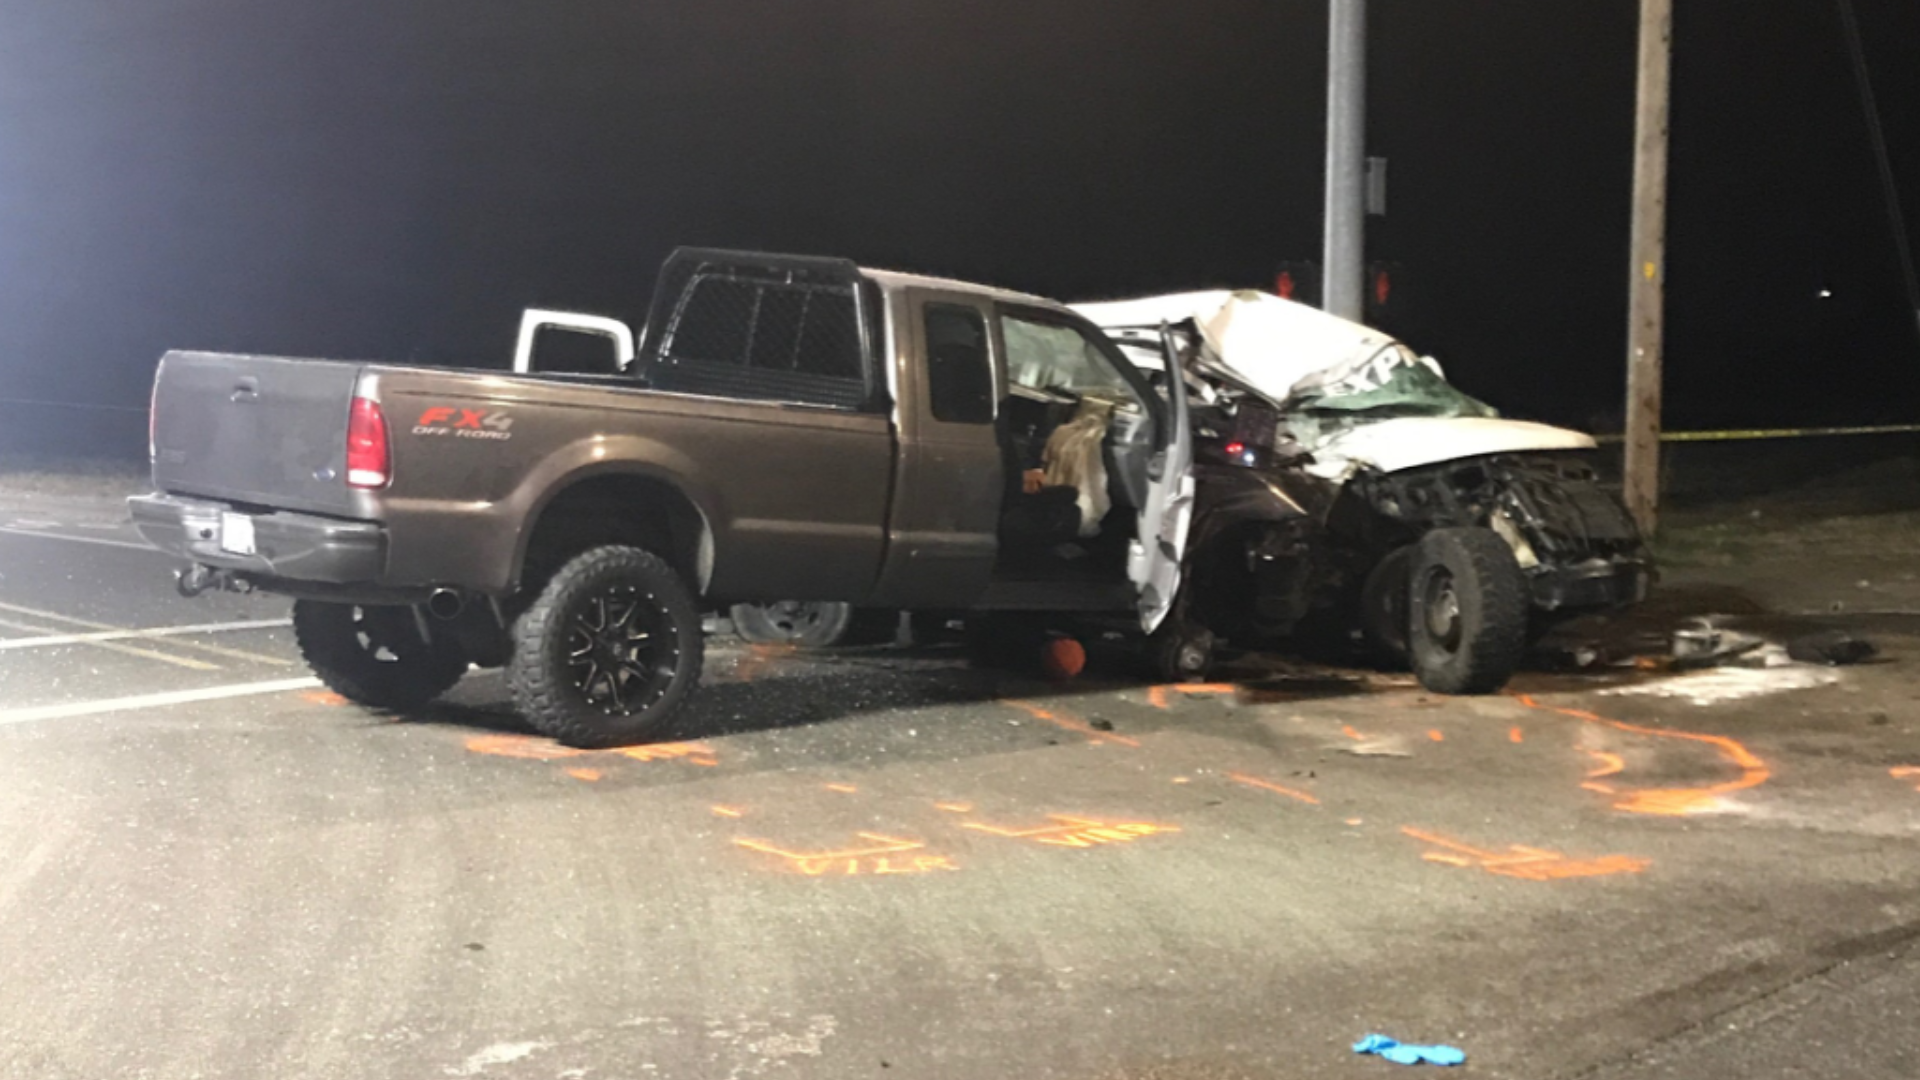 A van involved in the crash was carrying 13 people. The Marion County Sheriff's Office said Monday the occupants of the van were Christmas tree workers.